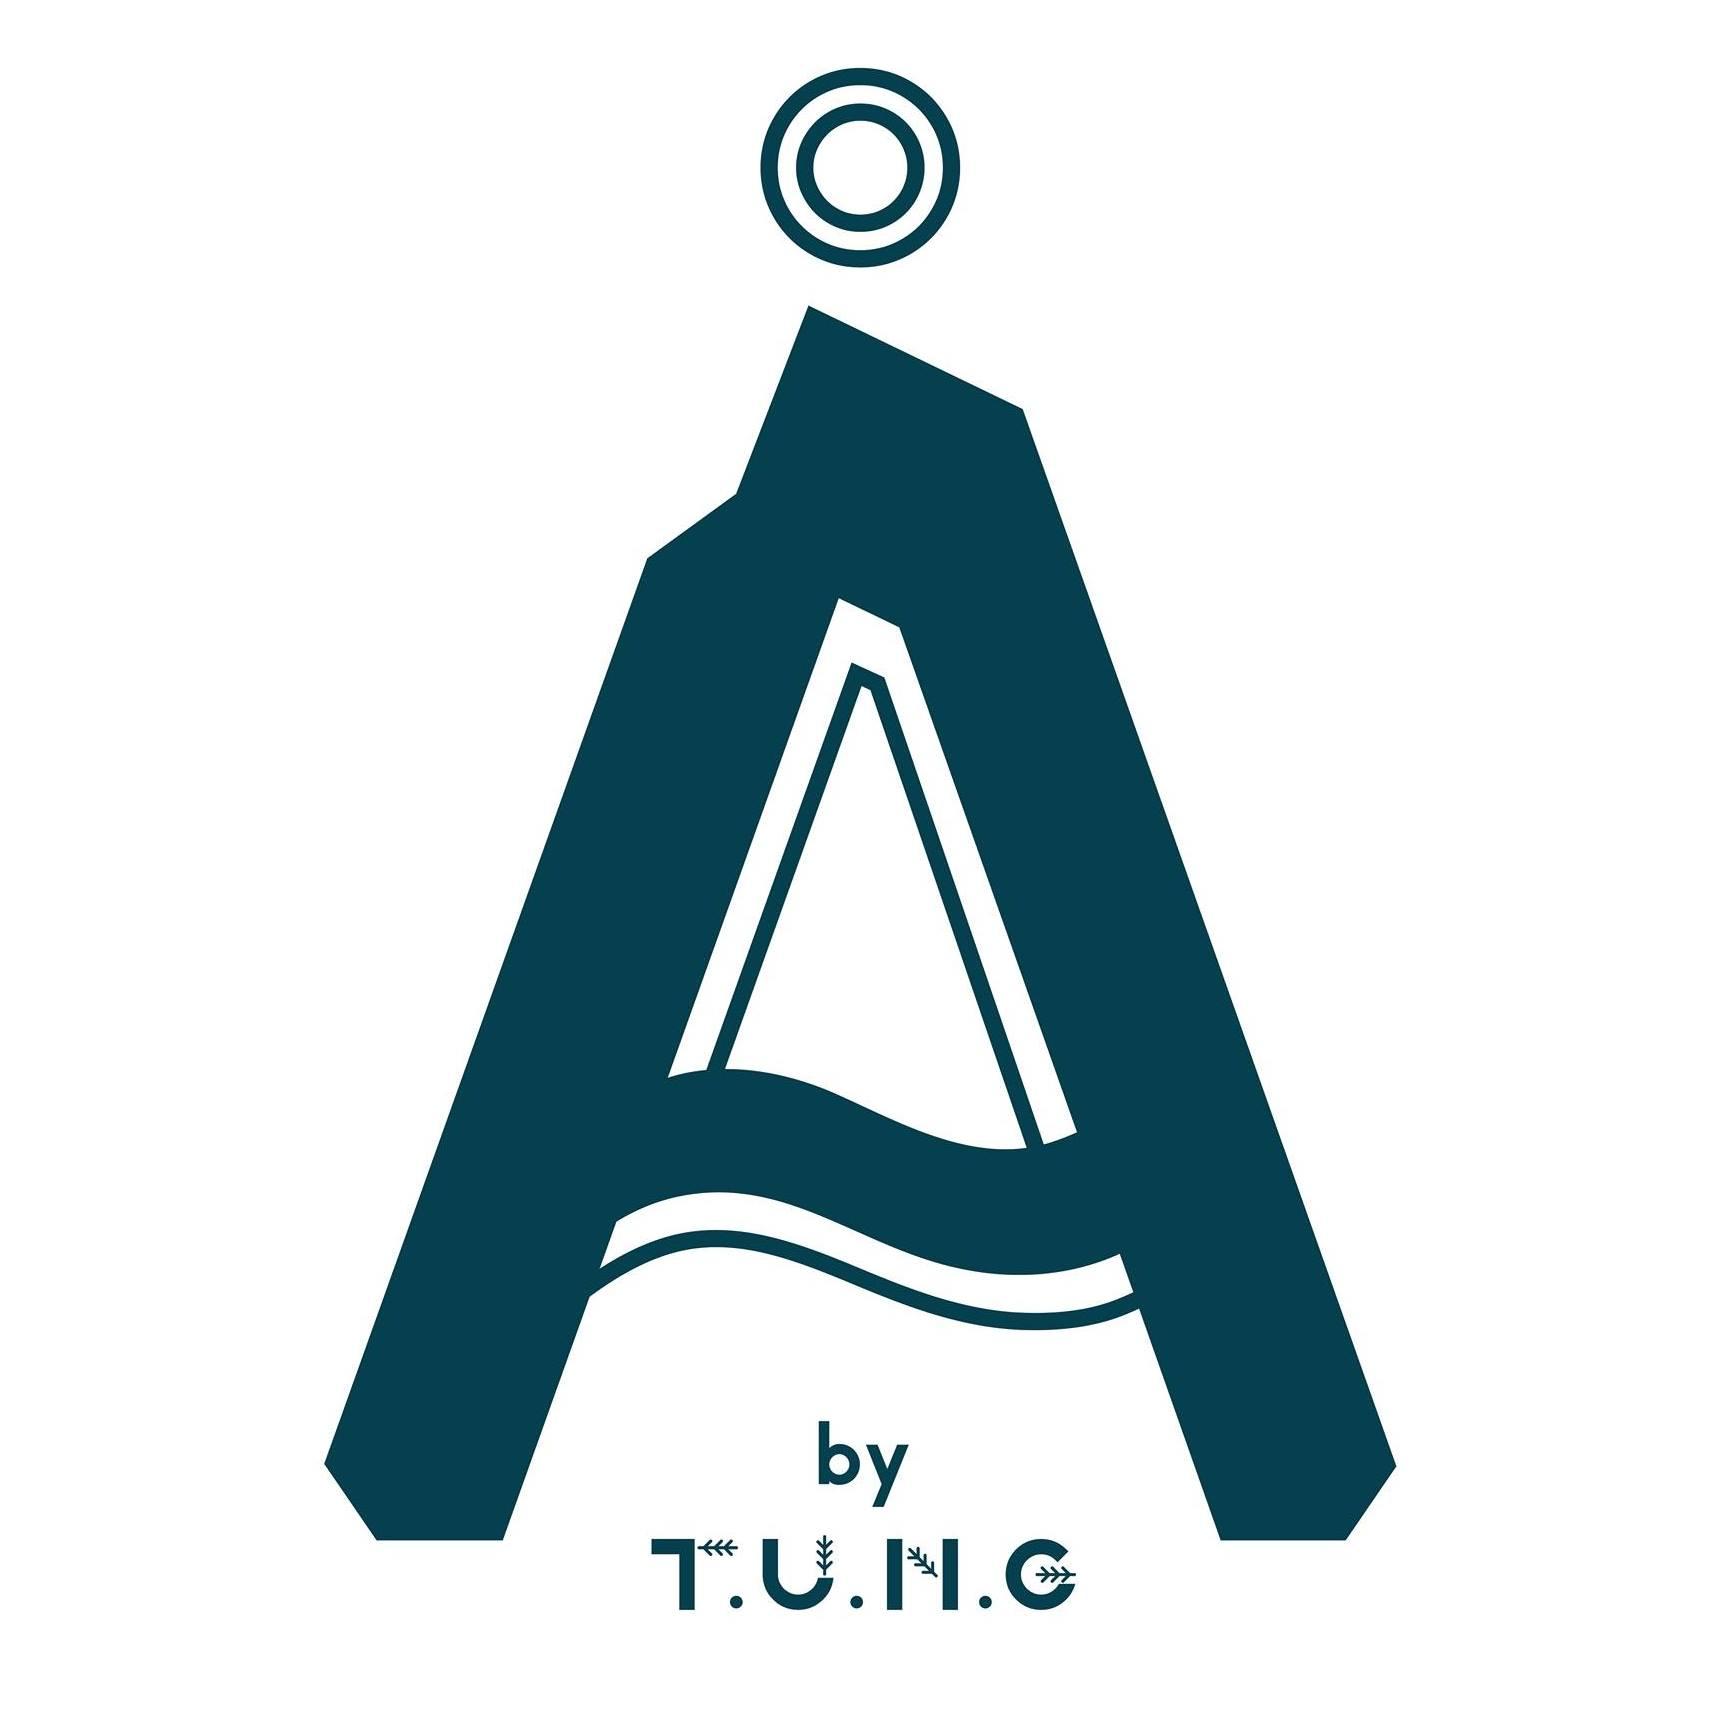 A by TUNG